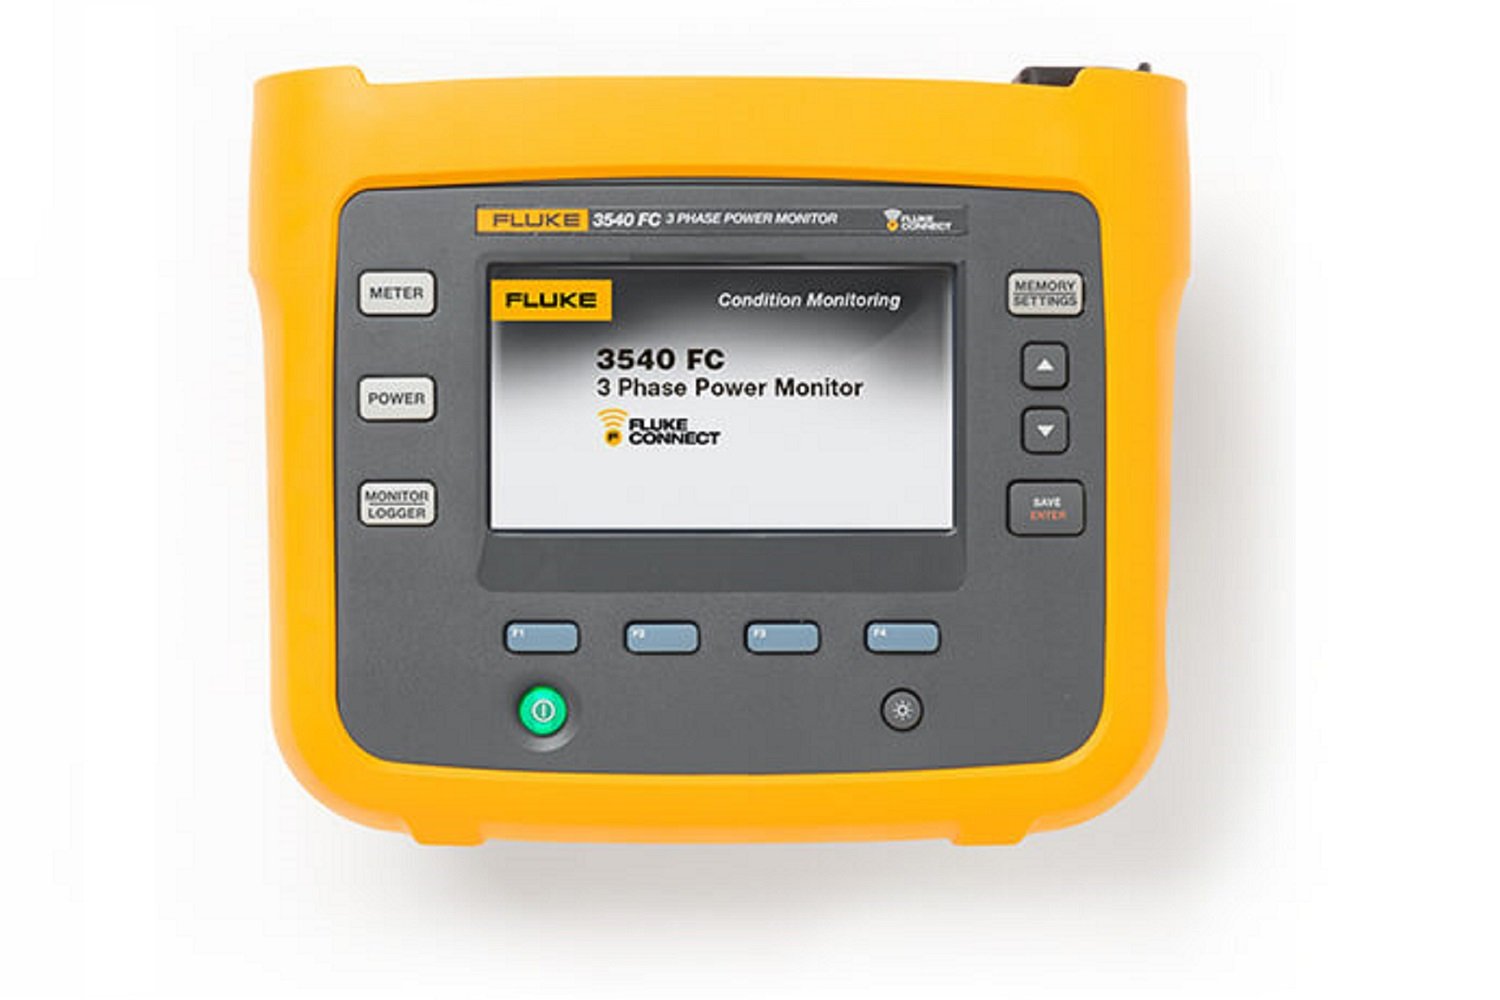 A clickable image of a Fluke 3540 FC Three-Phase Power Monitor. Leads to the product page.